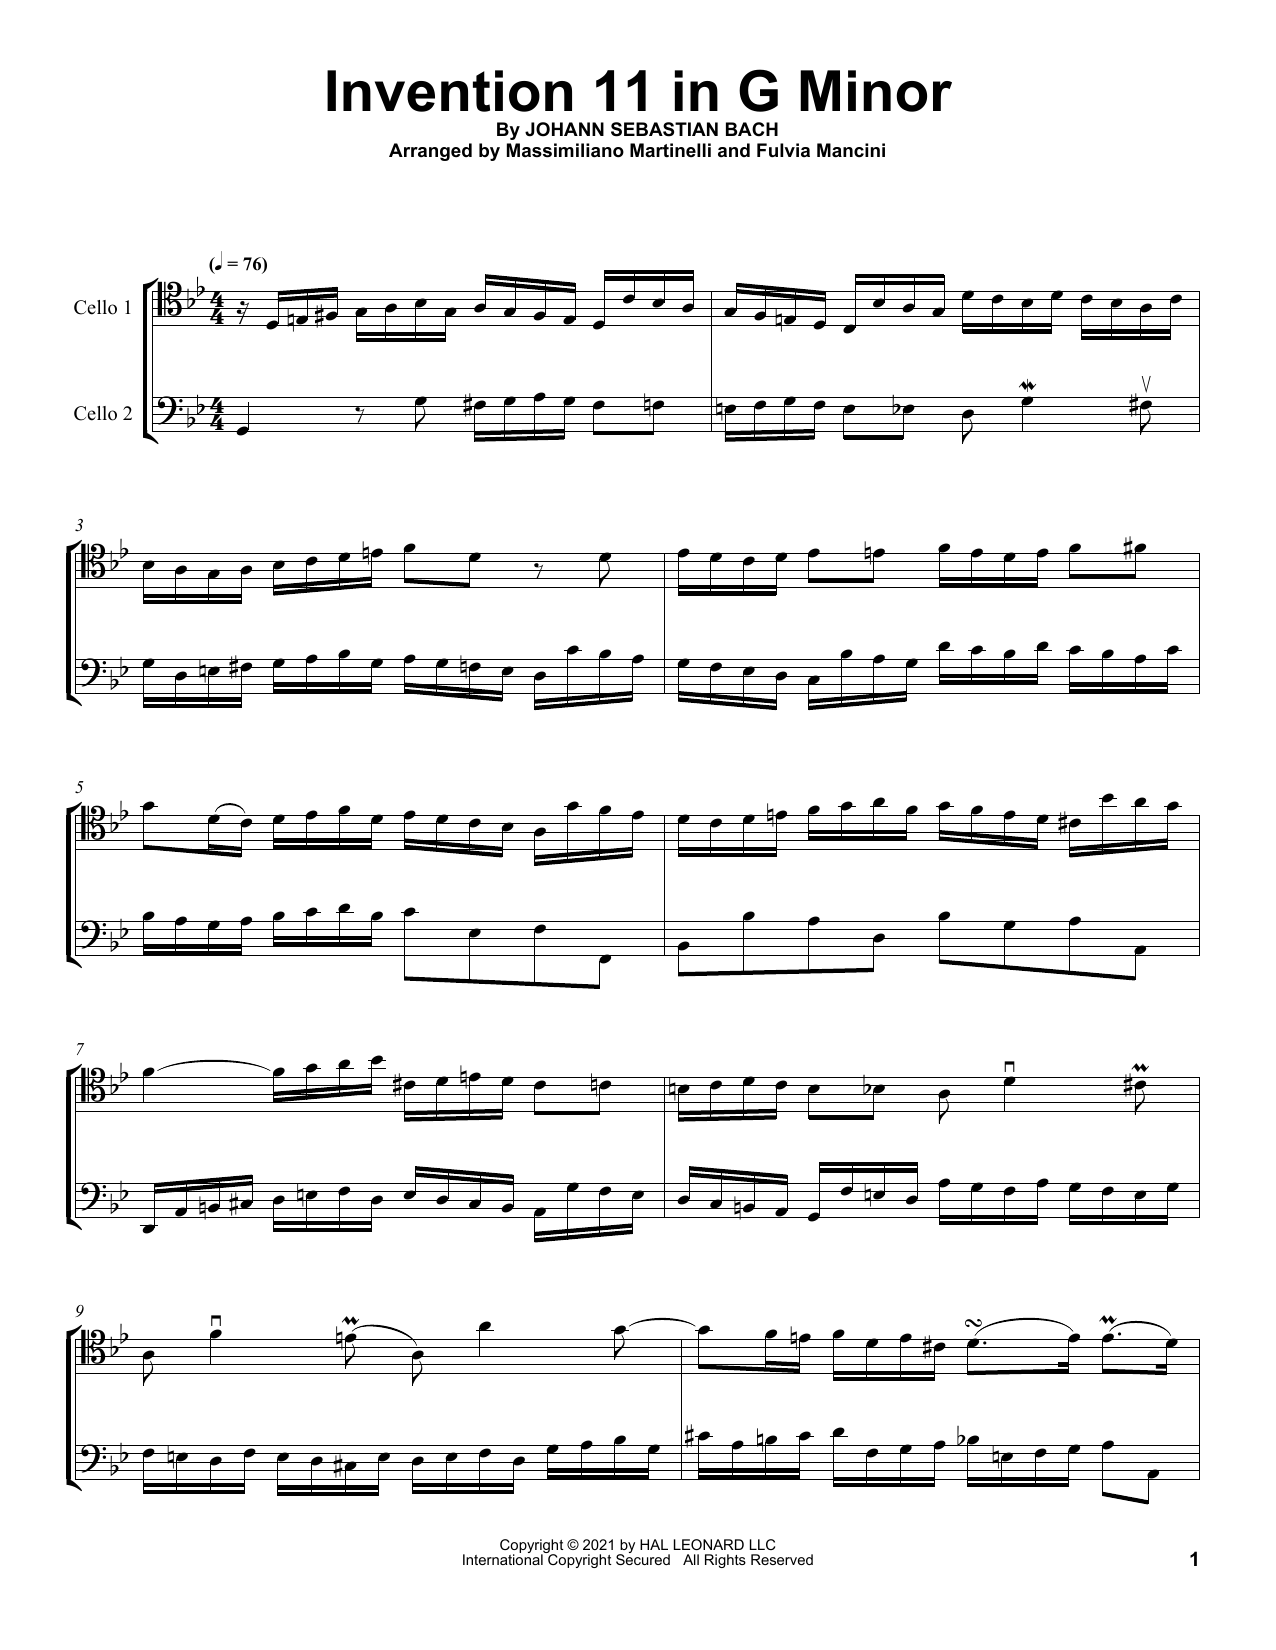 Download Mr & Mrs Cello Invention 11 In G Minor Sheet Music